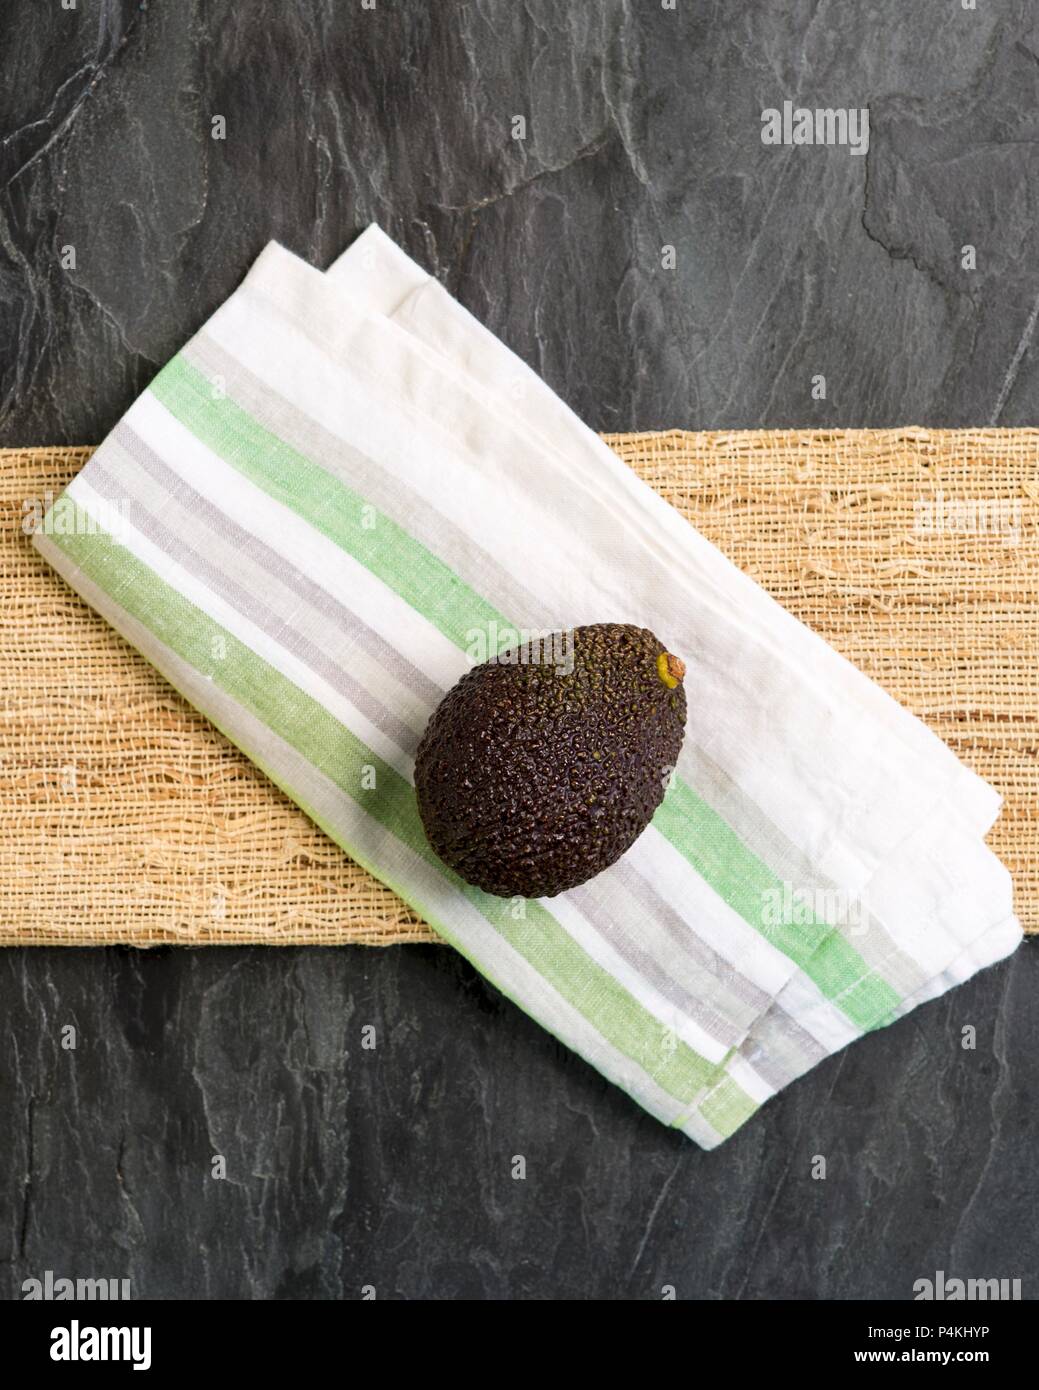 A whole avocado on a fabric napkin (seen from above) Stock Photo